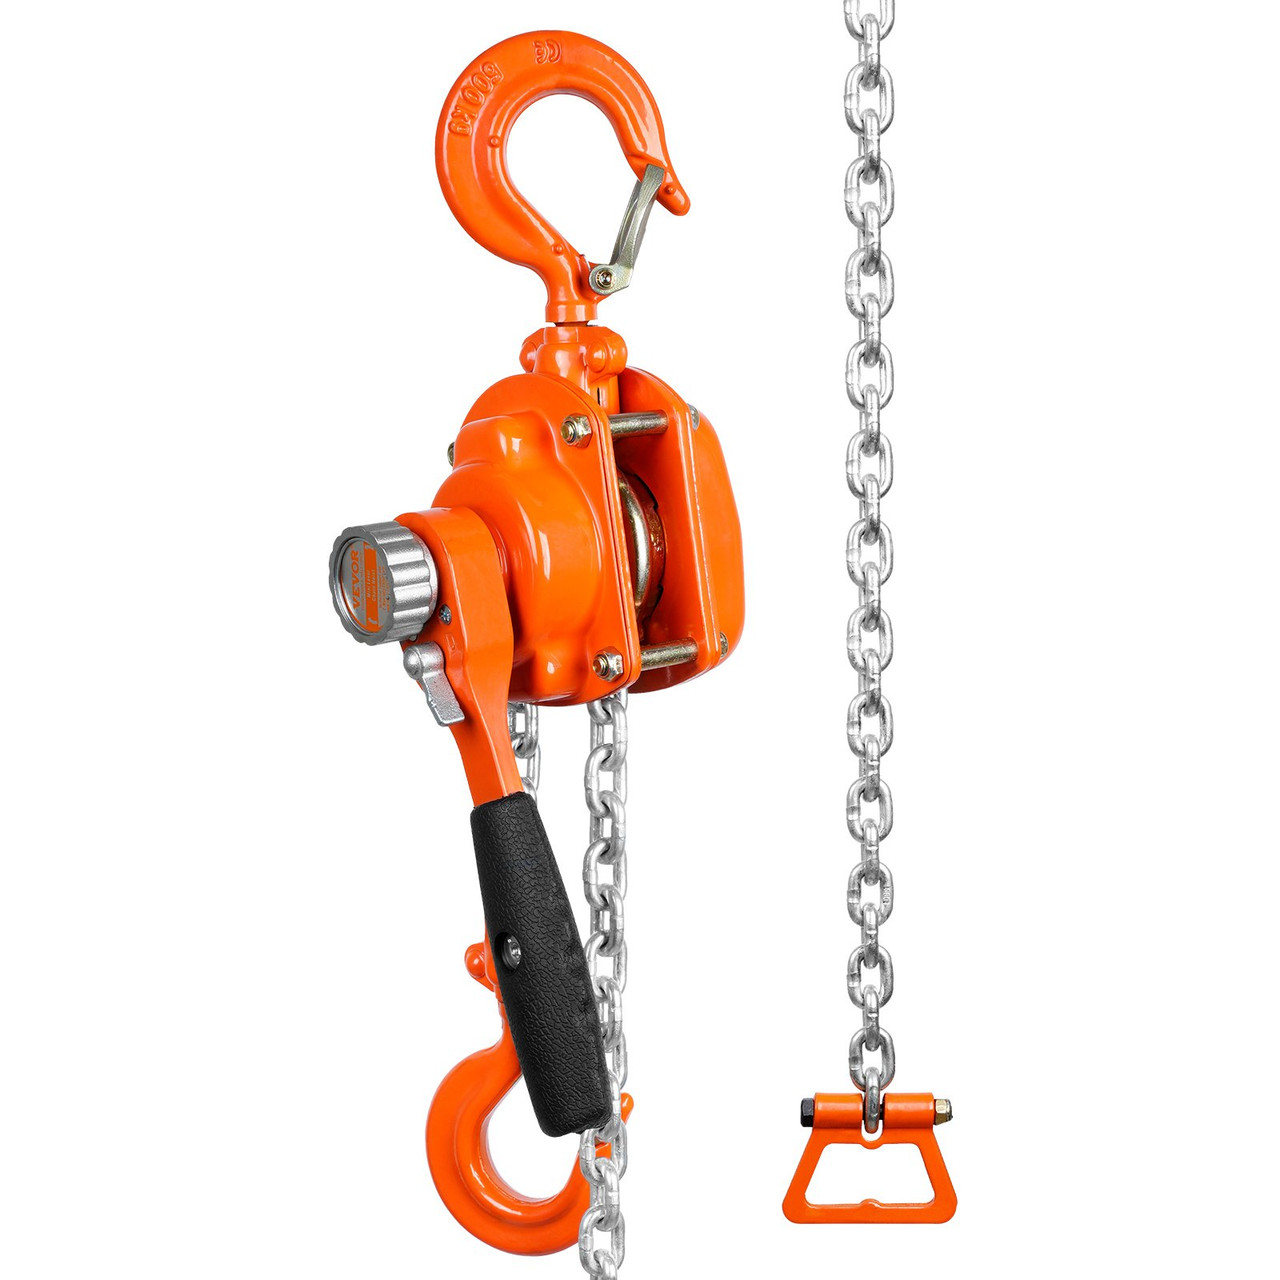 VEVOR Manual Lever Chain Hoist, 1/2 Ton 1100 lbs Capacity 5 FT Come Along, G80 Galvanized Carbon Steel with Weston Double-Pawl Brake, Auto Chain Leading & 360° Rotation Hook, for Garage Factory Dock